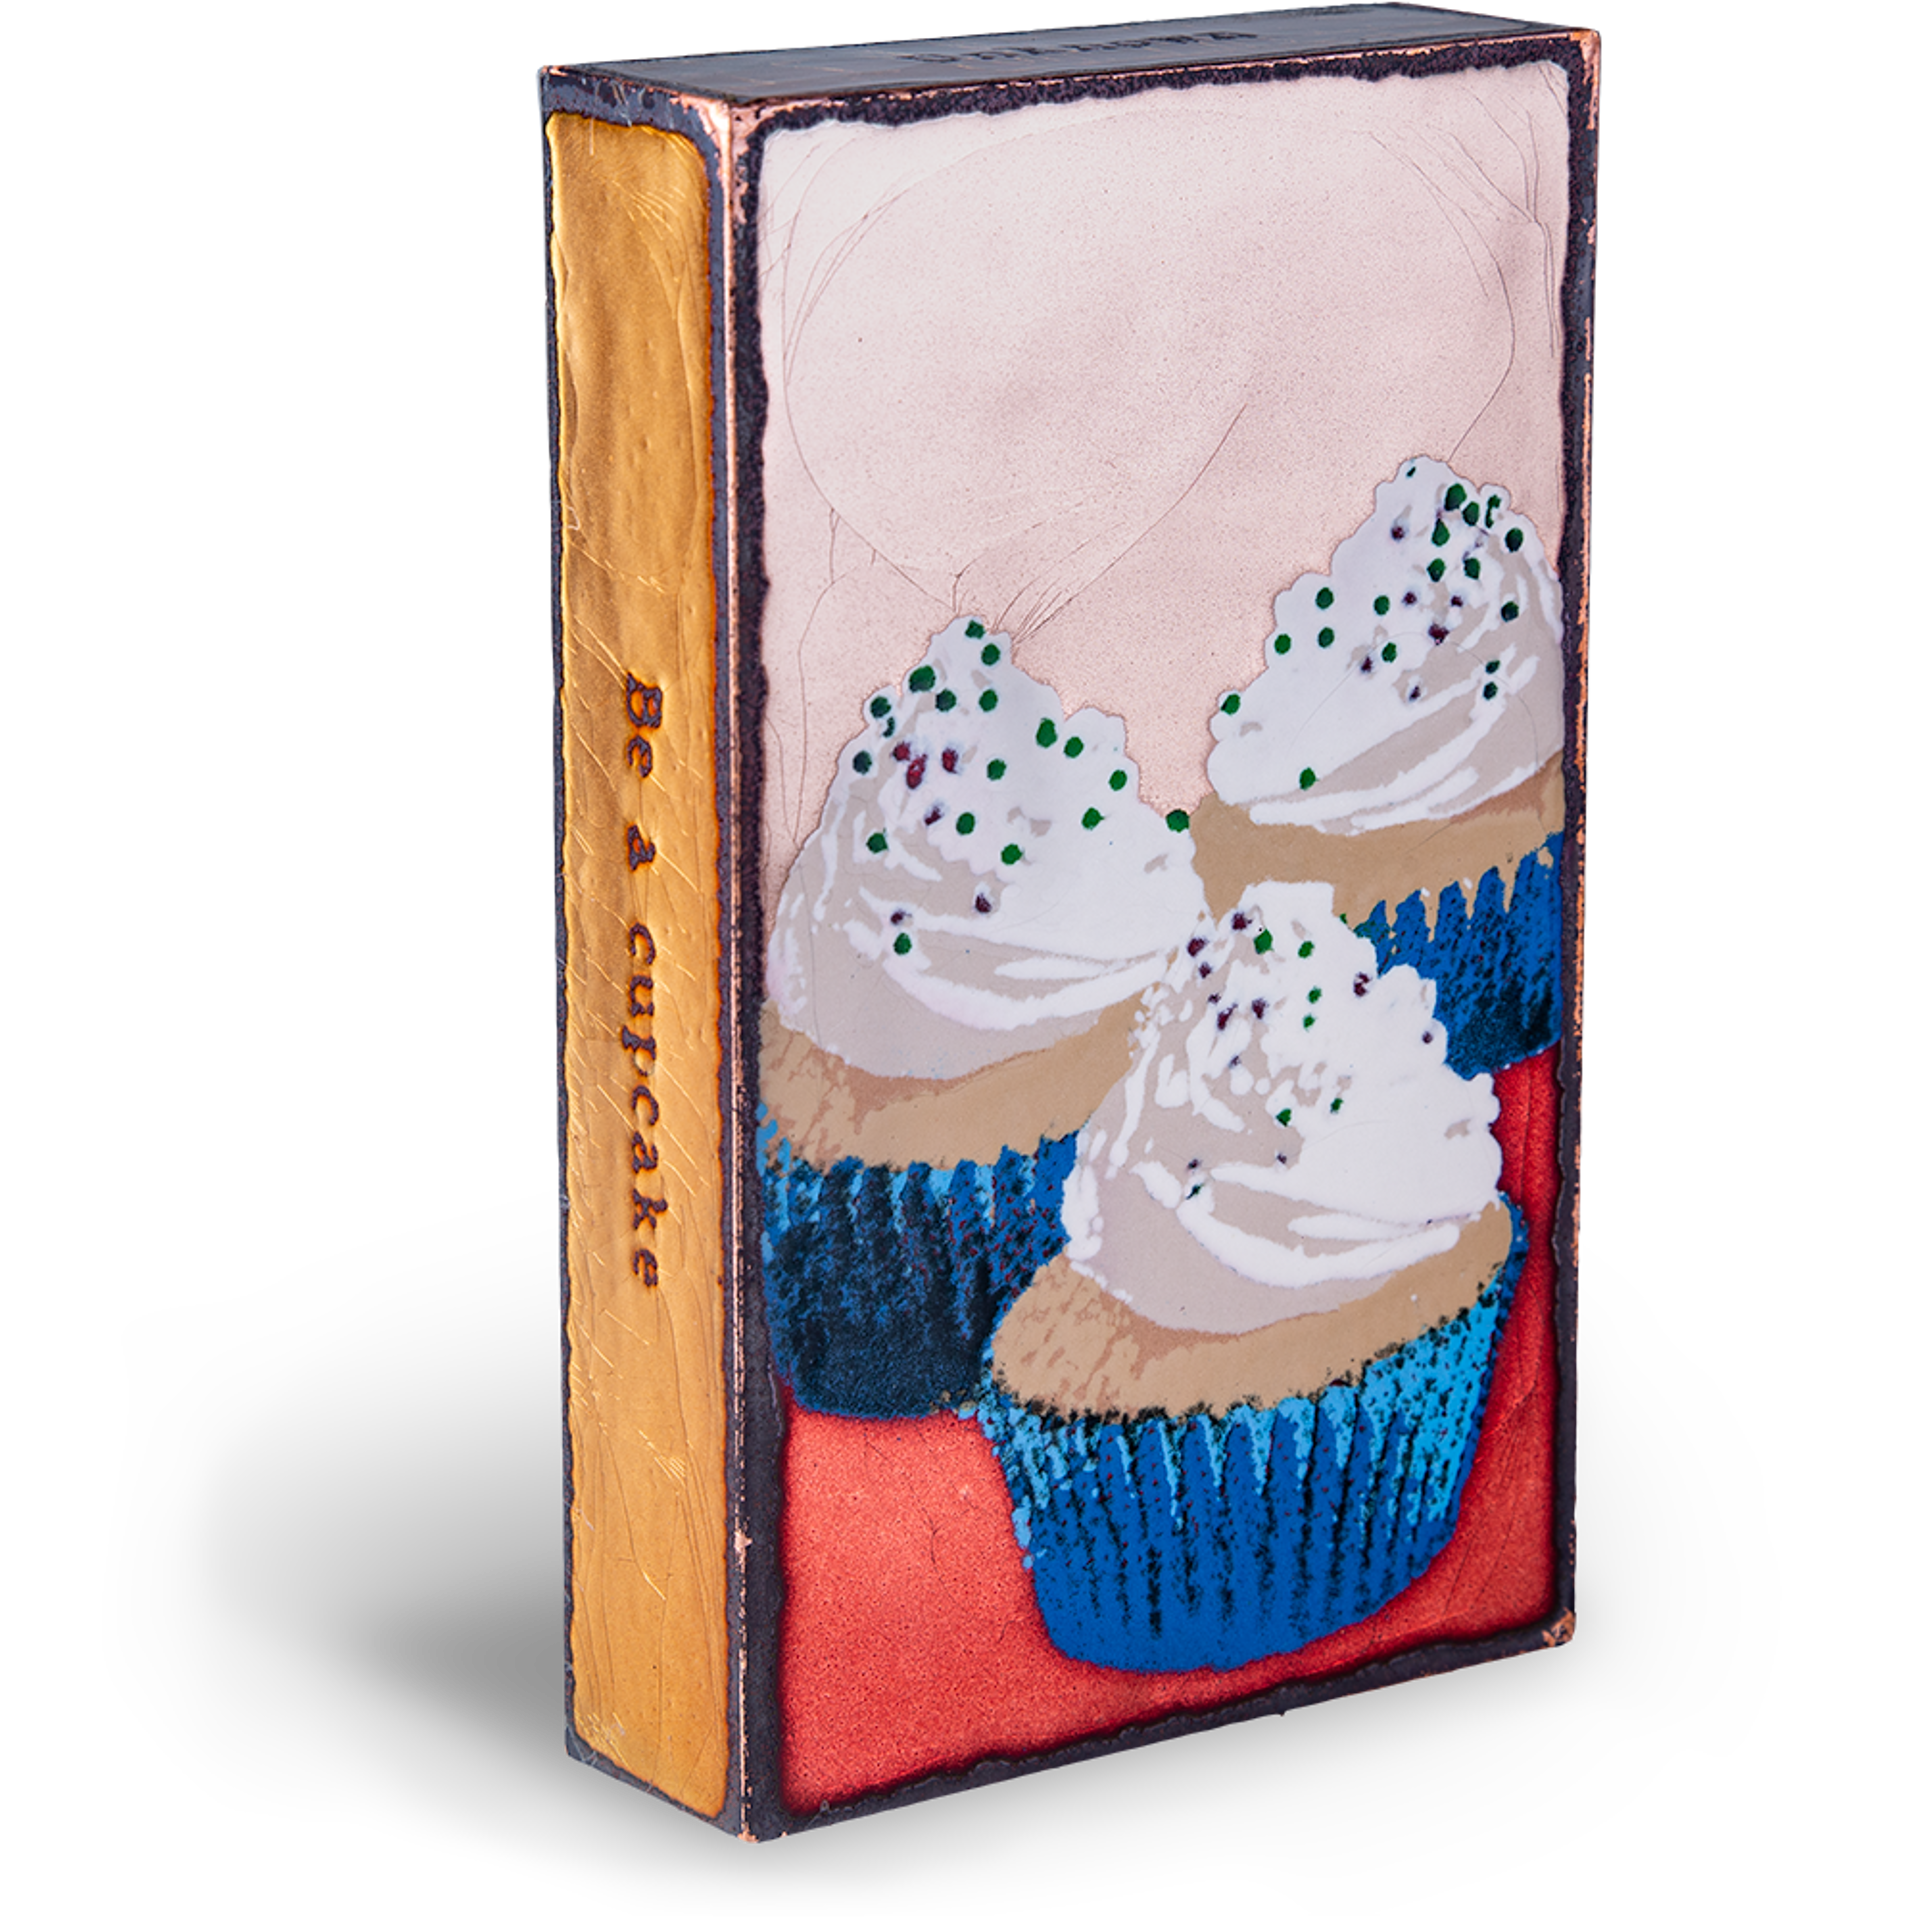 Delicacy (Retired Tile) "Be a cupcake in a world full of muffins."  - Unknown by Houston Llew